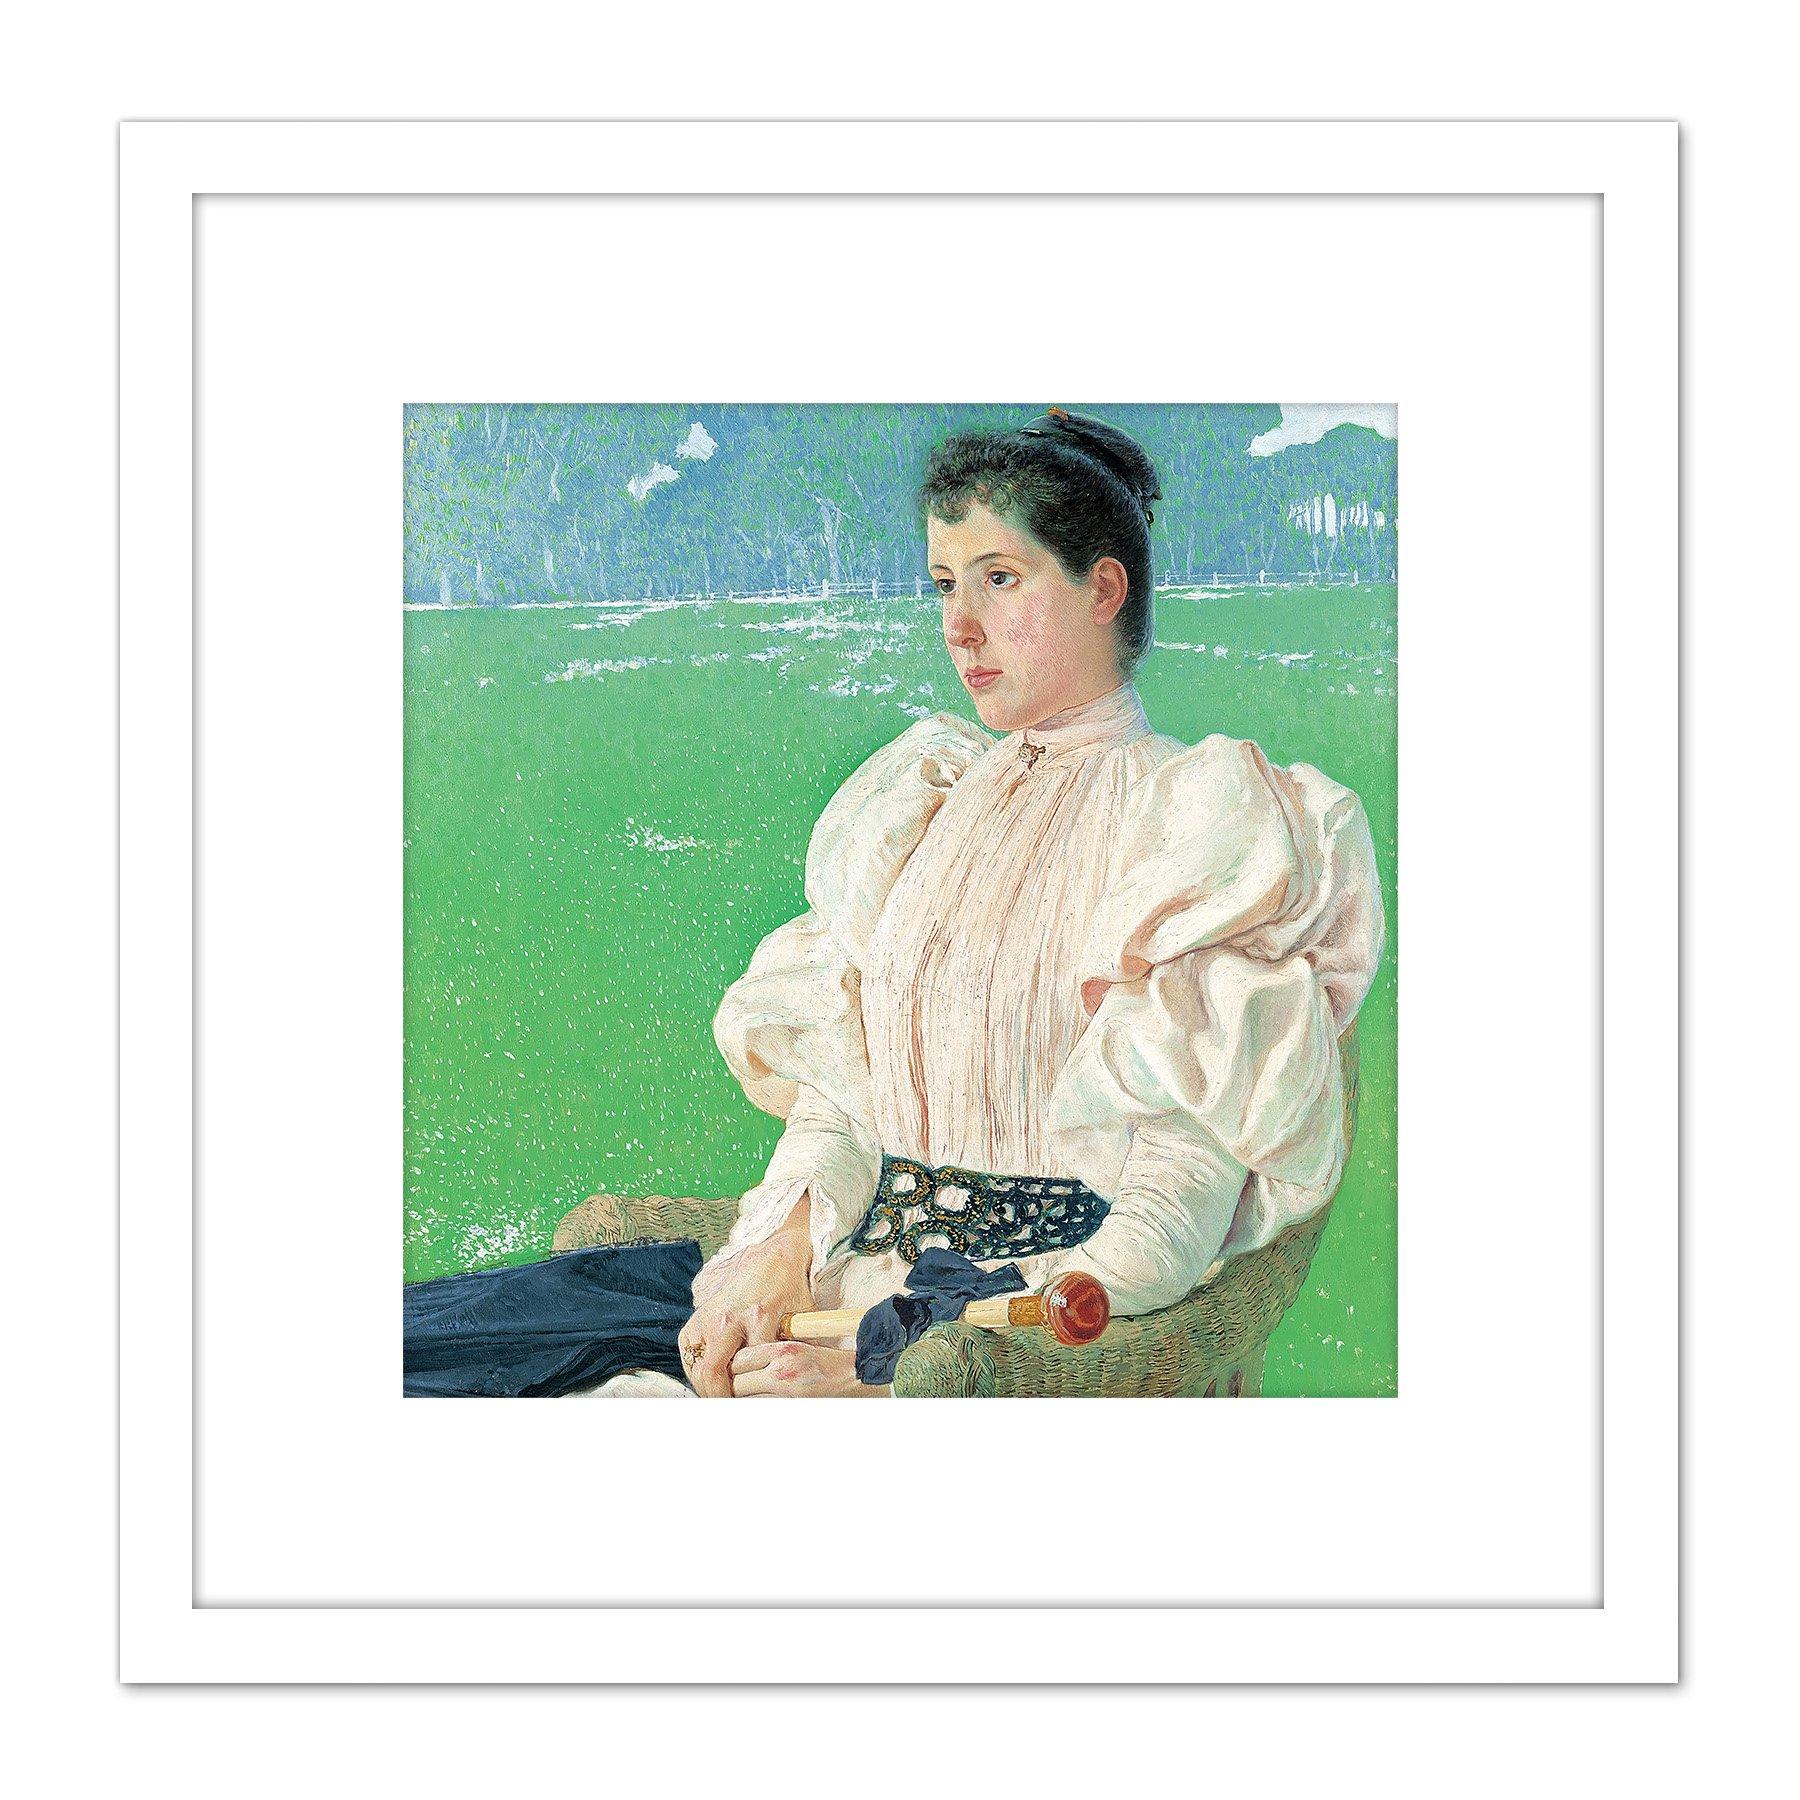 Anselmo Guinea Portrait Of A Lady Painting 8X8 Inch Square Wooden Framed Wall Art Print Picture with Mount